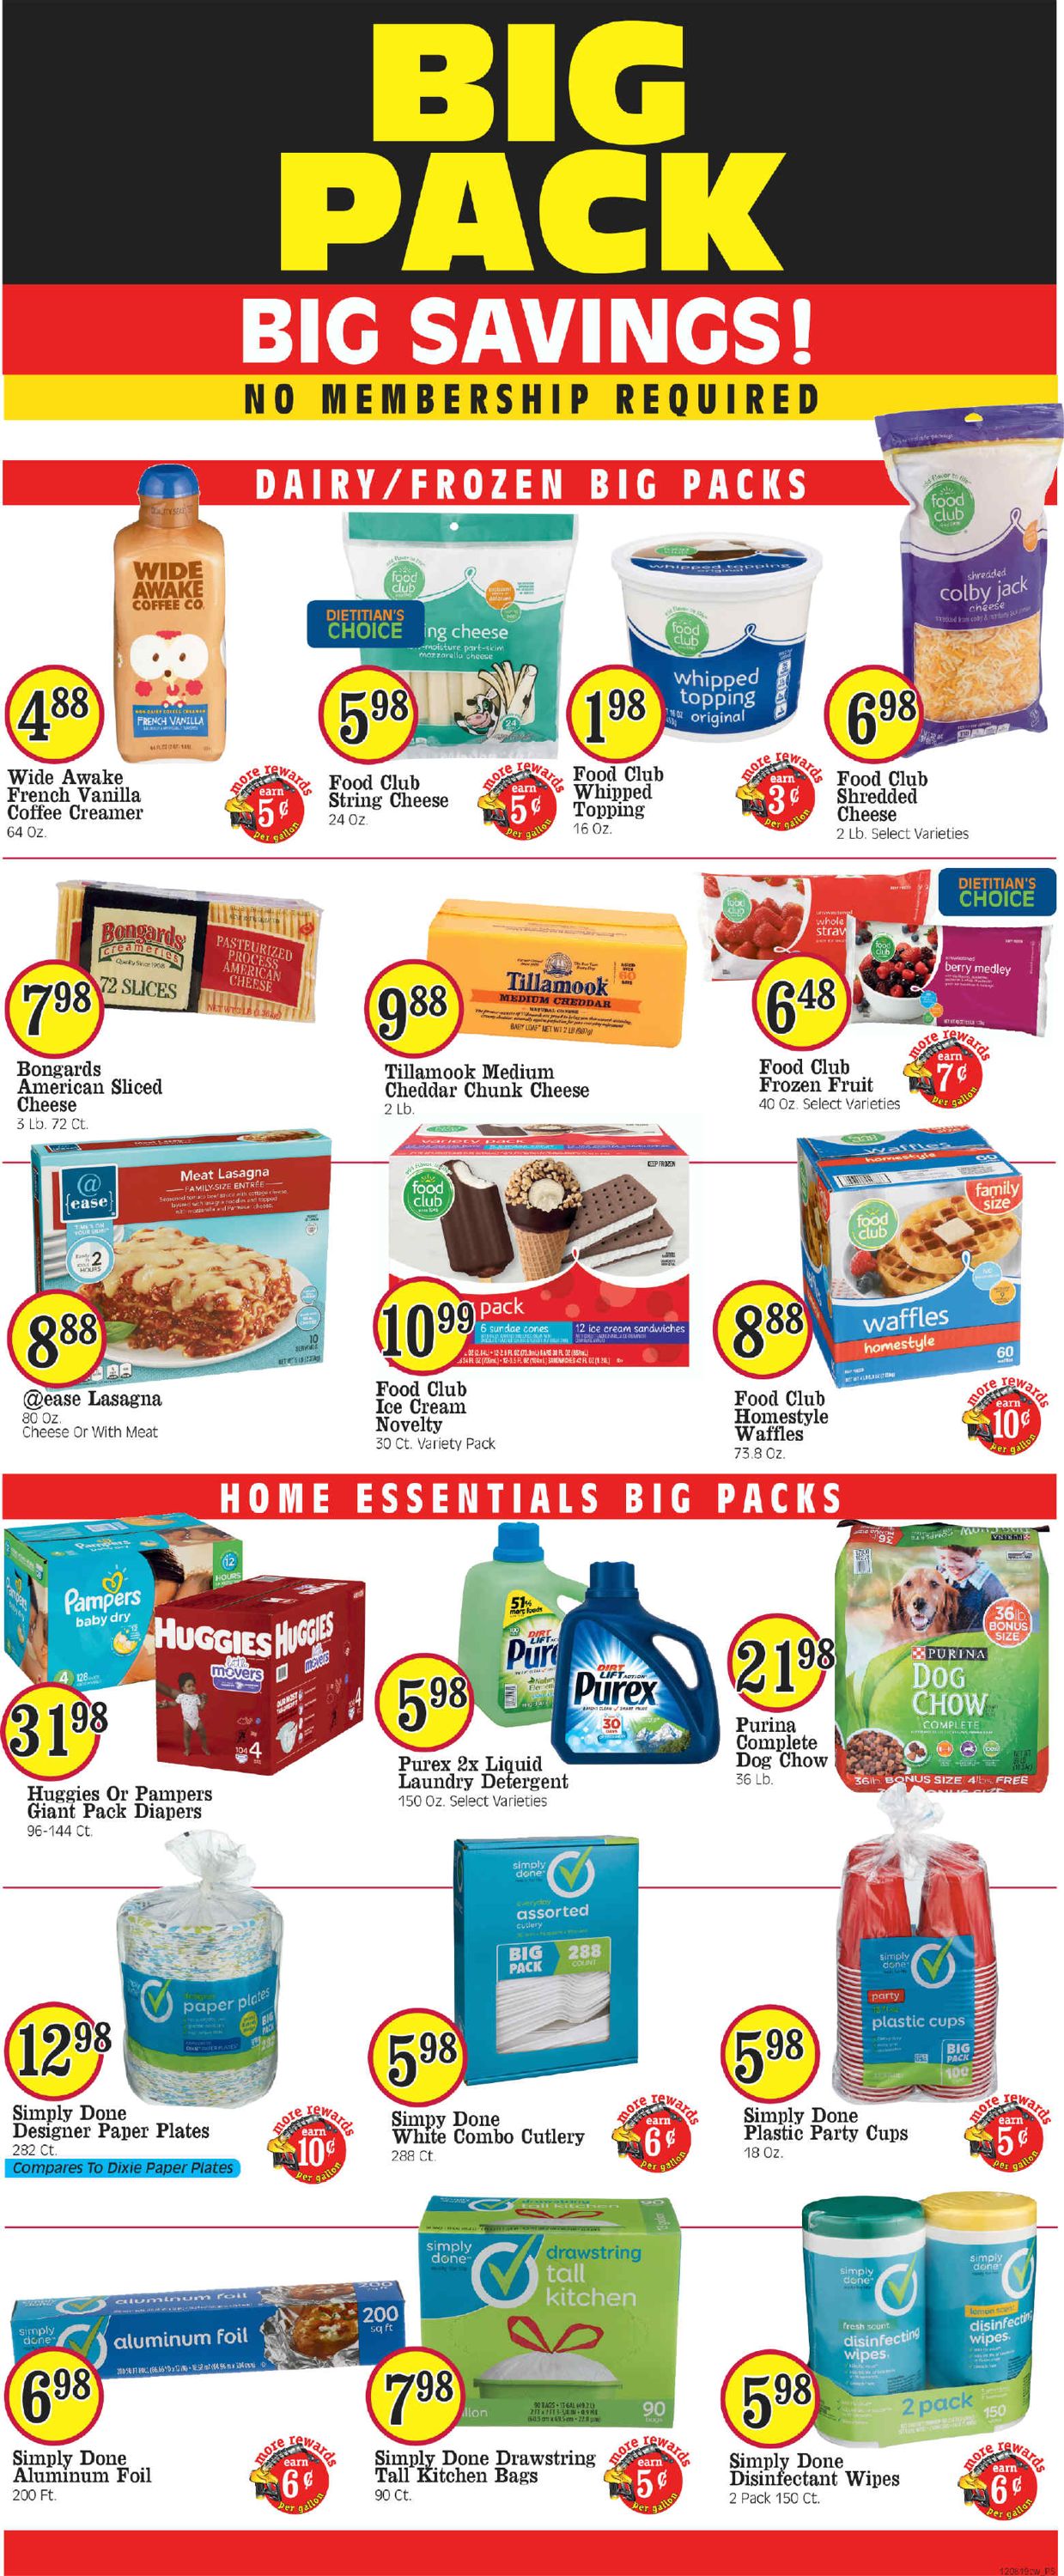 Cash Wise - Holidays Ad 2019 Weekly Ad Circular - valid 12/08-12/14/2019 (Page 5)